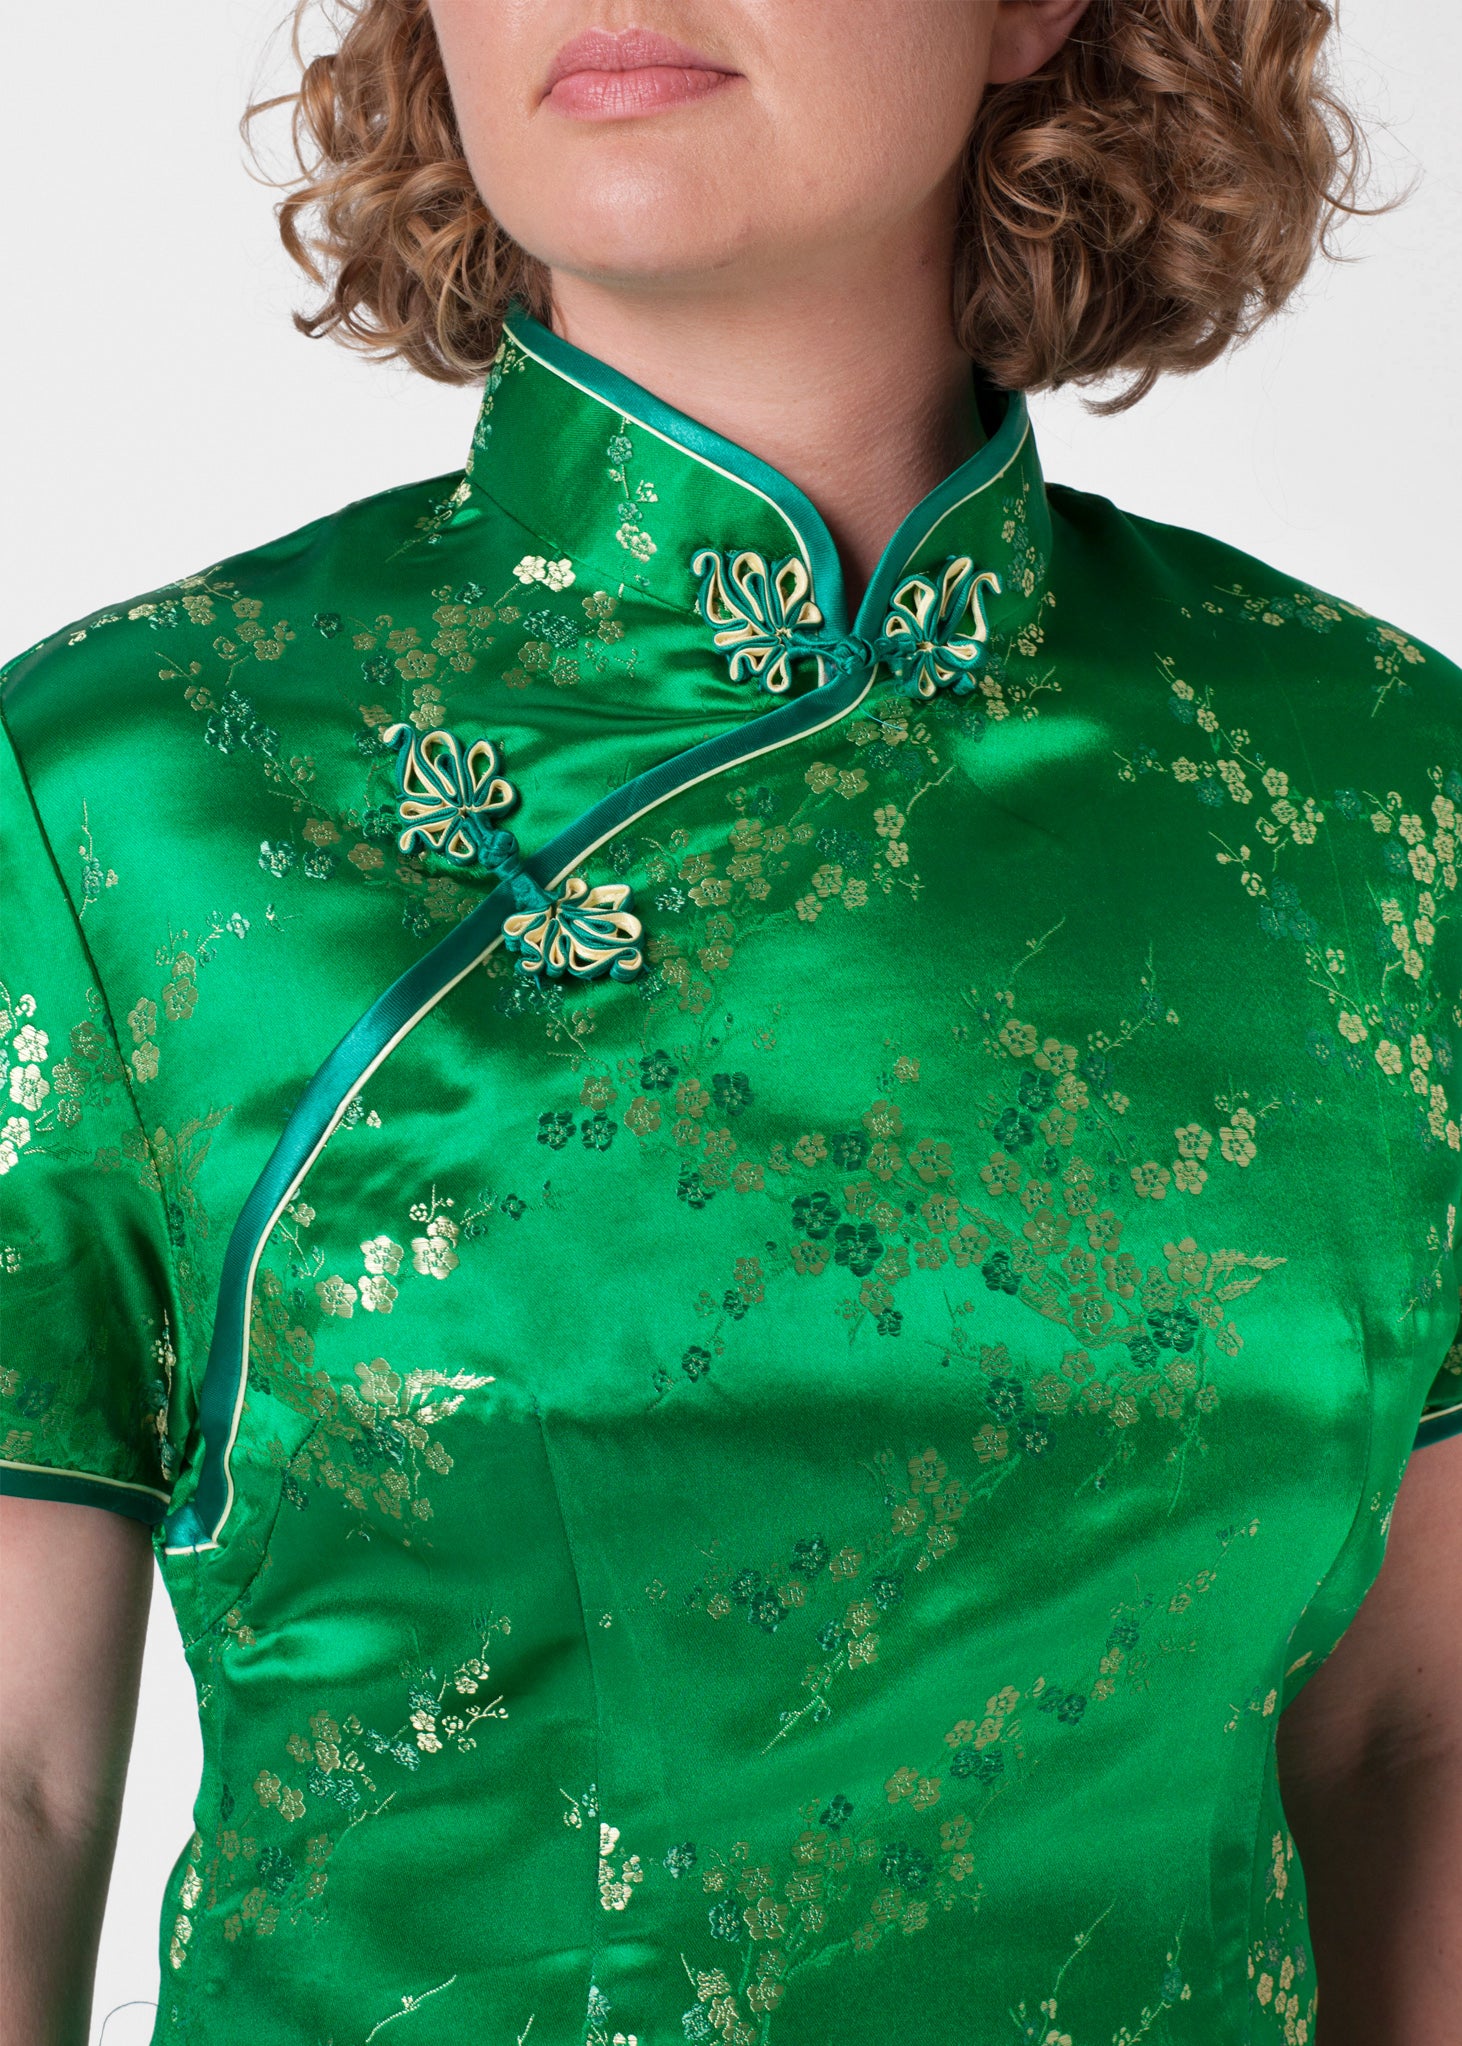 Bound edge mandarin collar and aysmmetric fastening which closes with hand stitched flower and knot frog fastenings in an accent shade. Open ended side zip and press studs